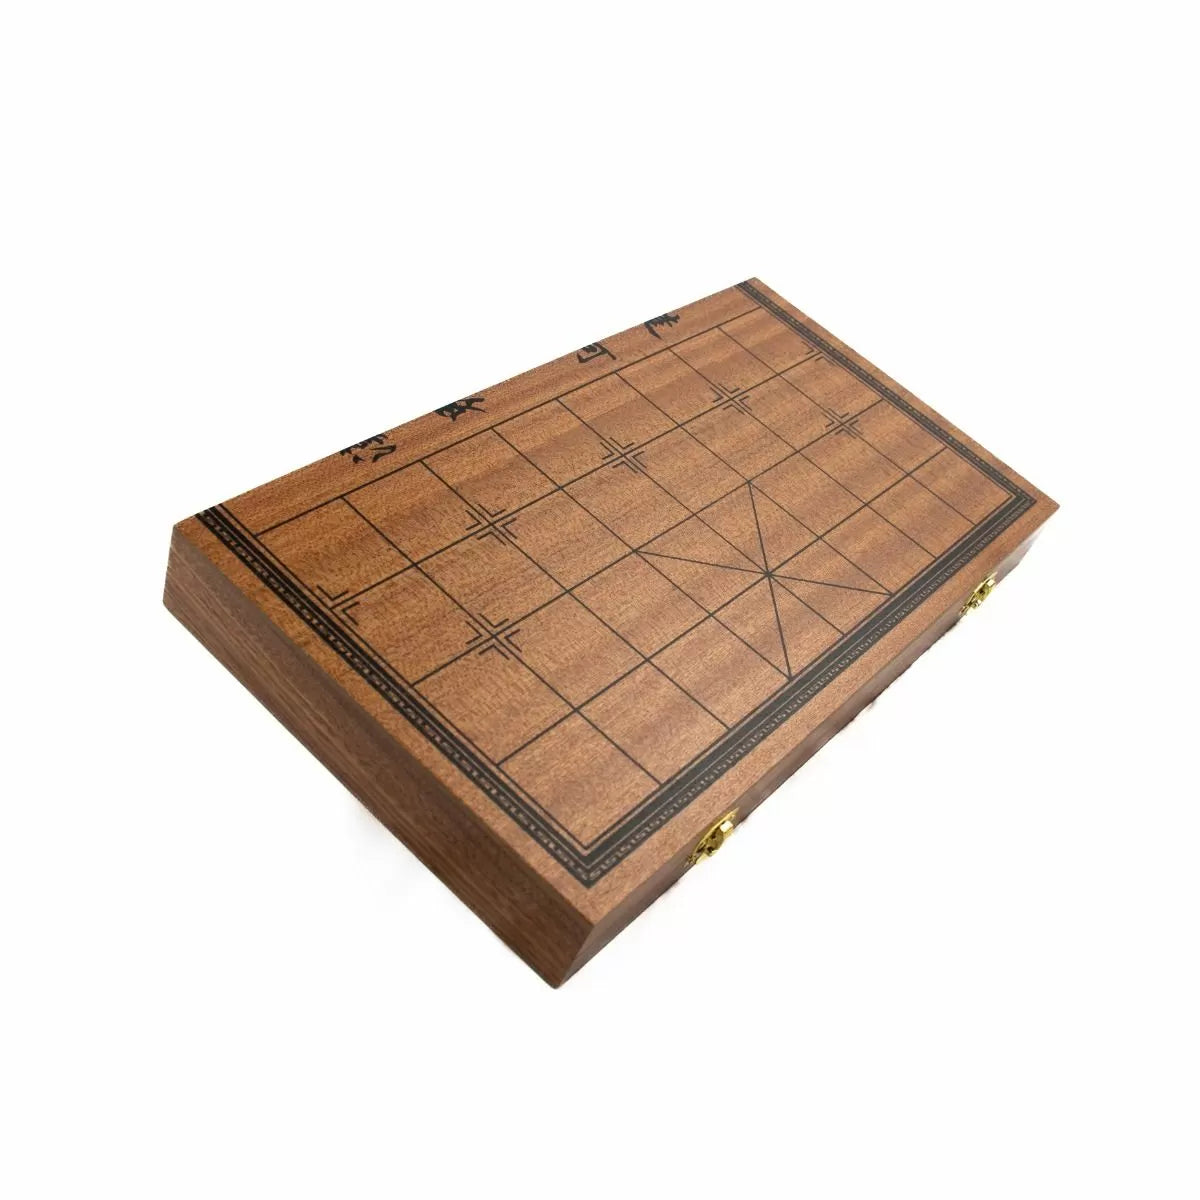 Wooden Chinese Chess Set